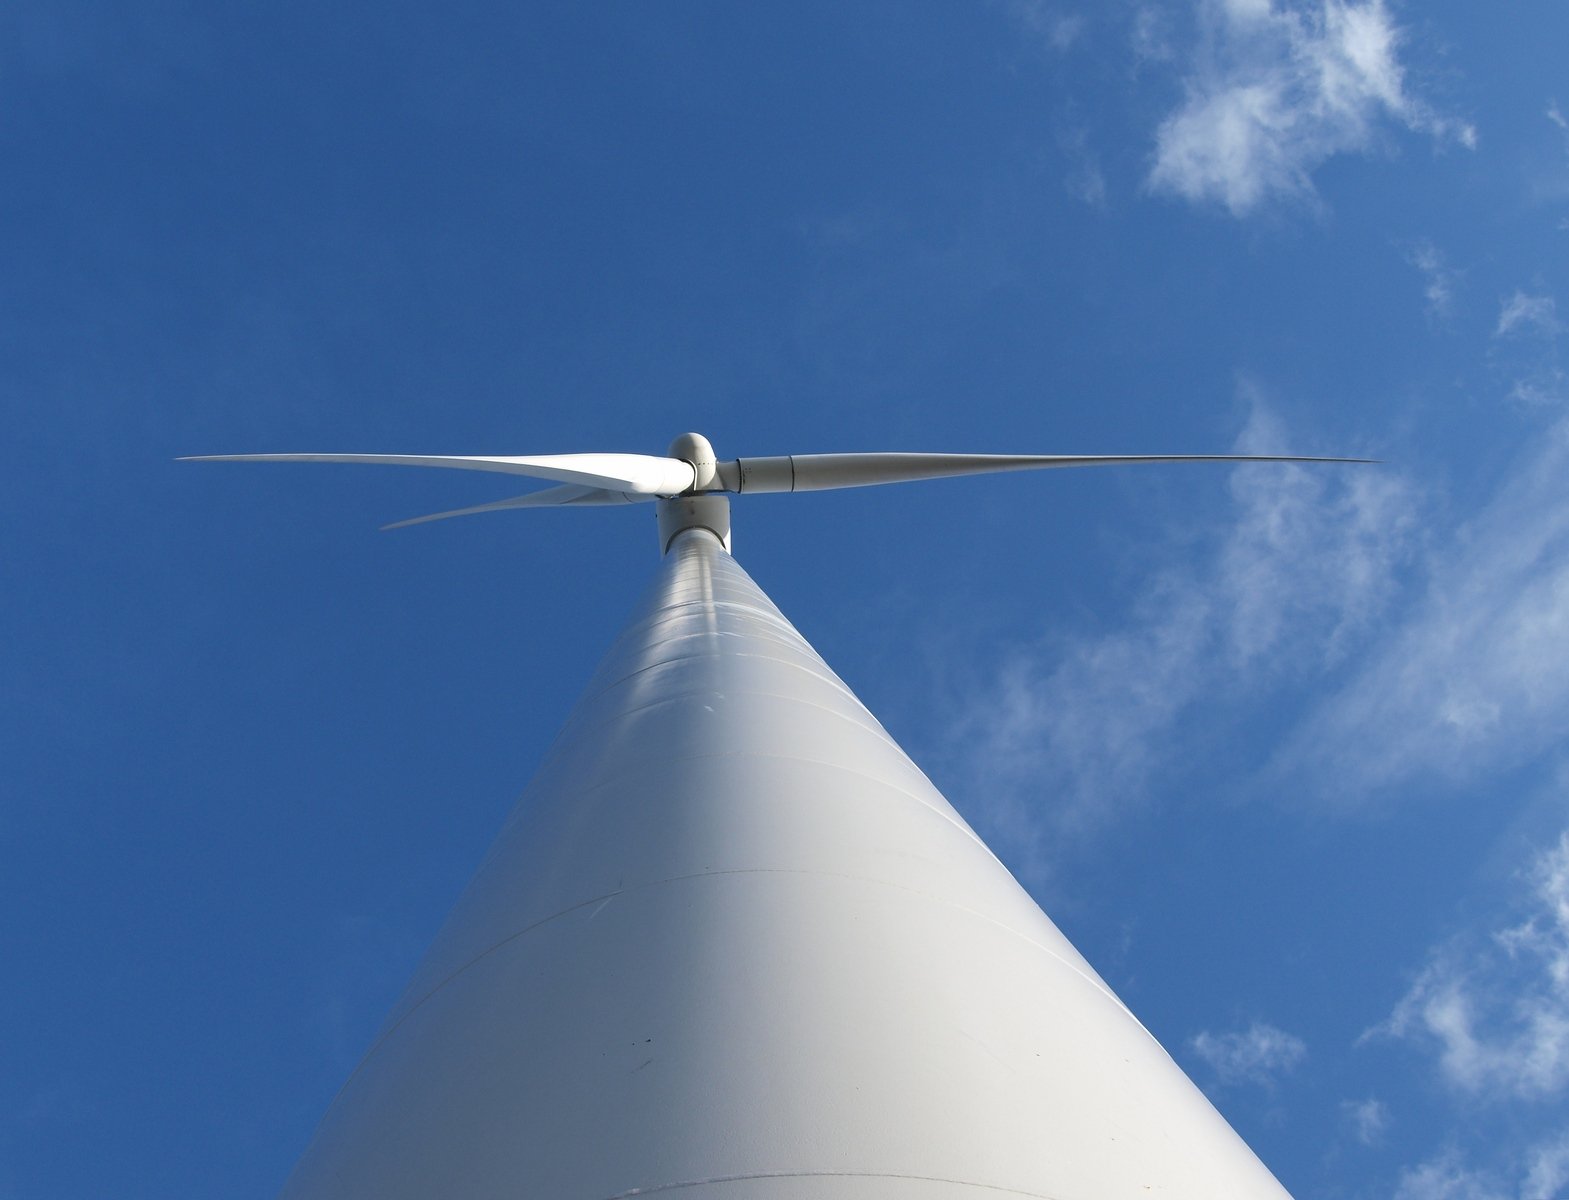 the white wind turbine has a long, curved top